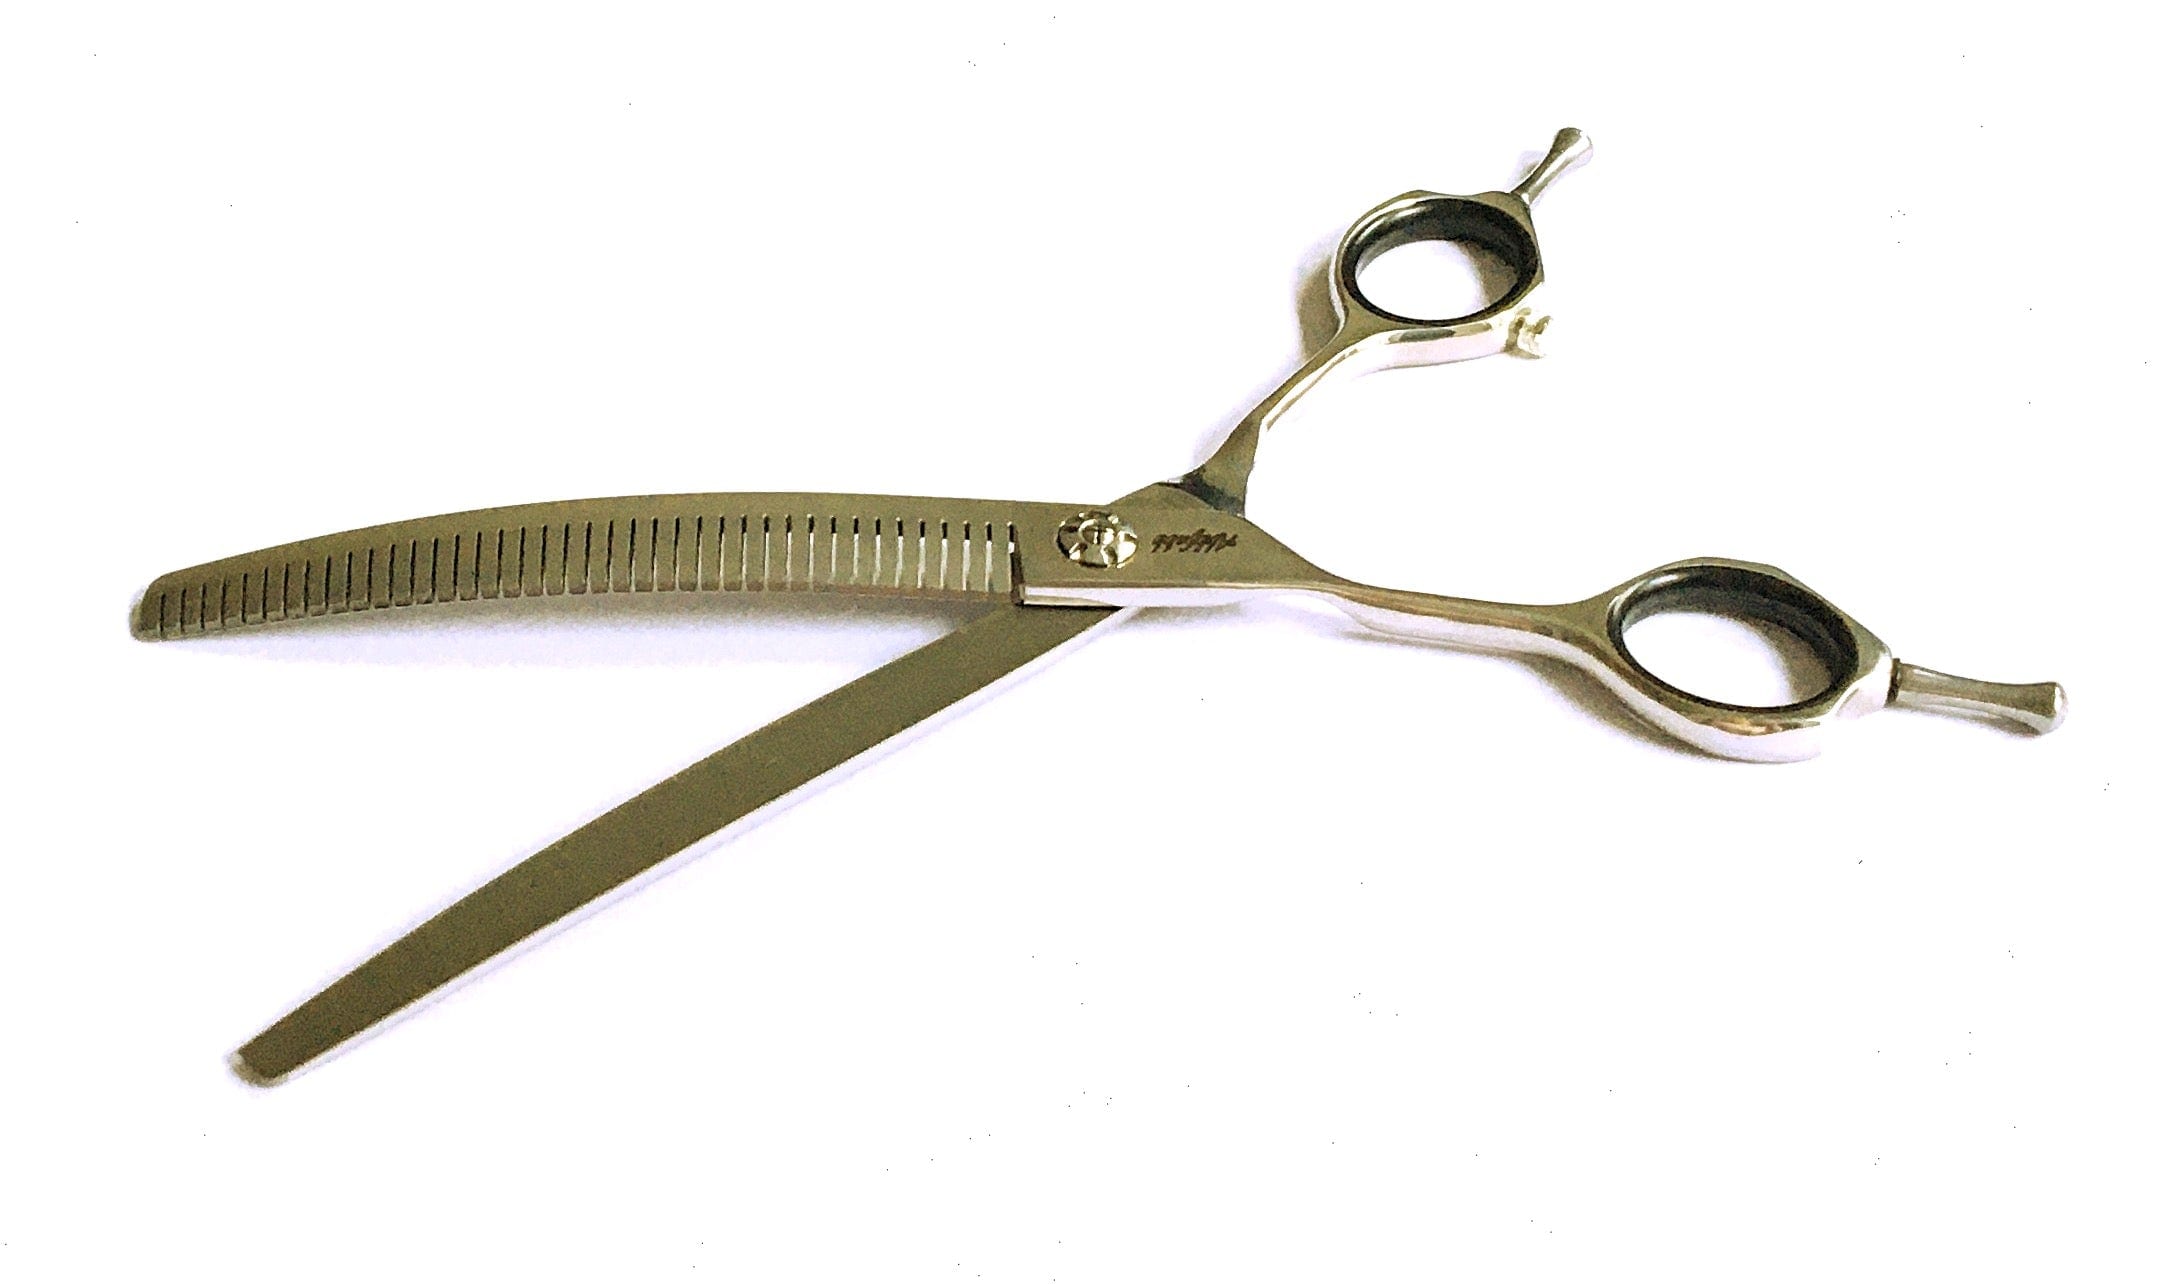 Abbfabb Grooming Scissors Ltd Left Handed 7" 40 Piano Teeth Reversible Curved Thinning Scissor. Left Handed 7" Flippable Curved Fluffer.